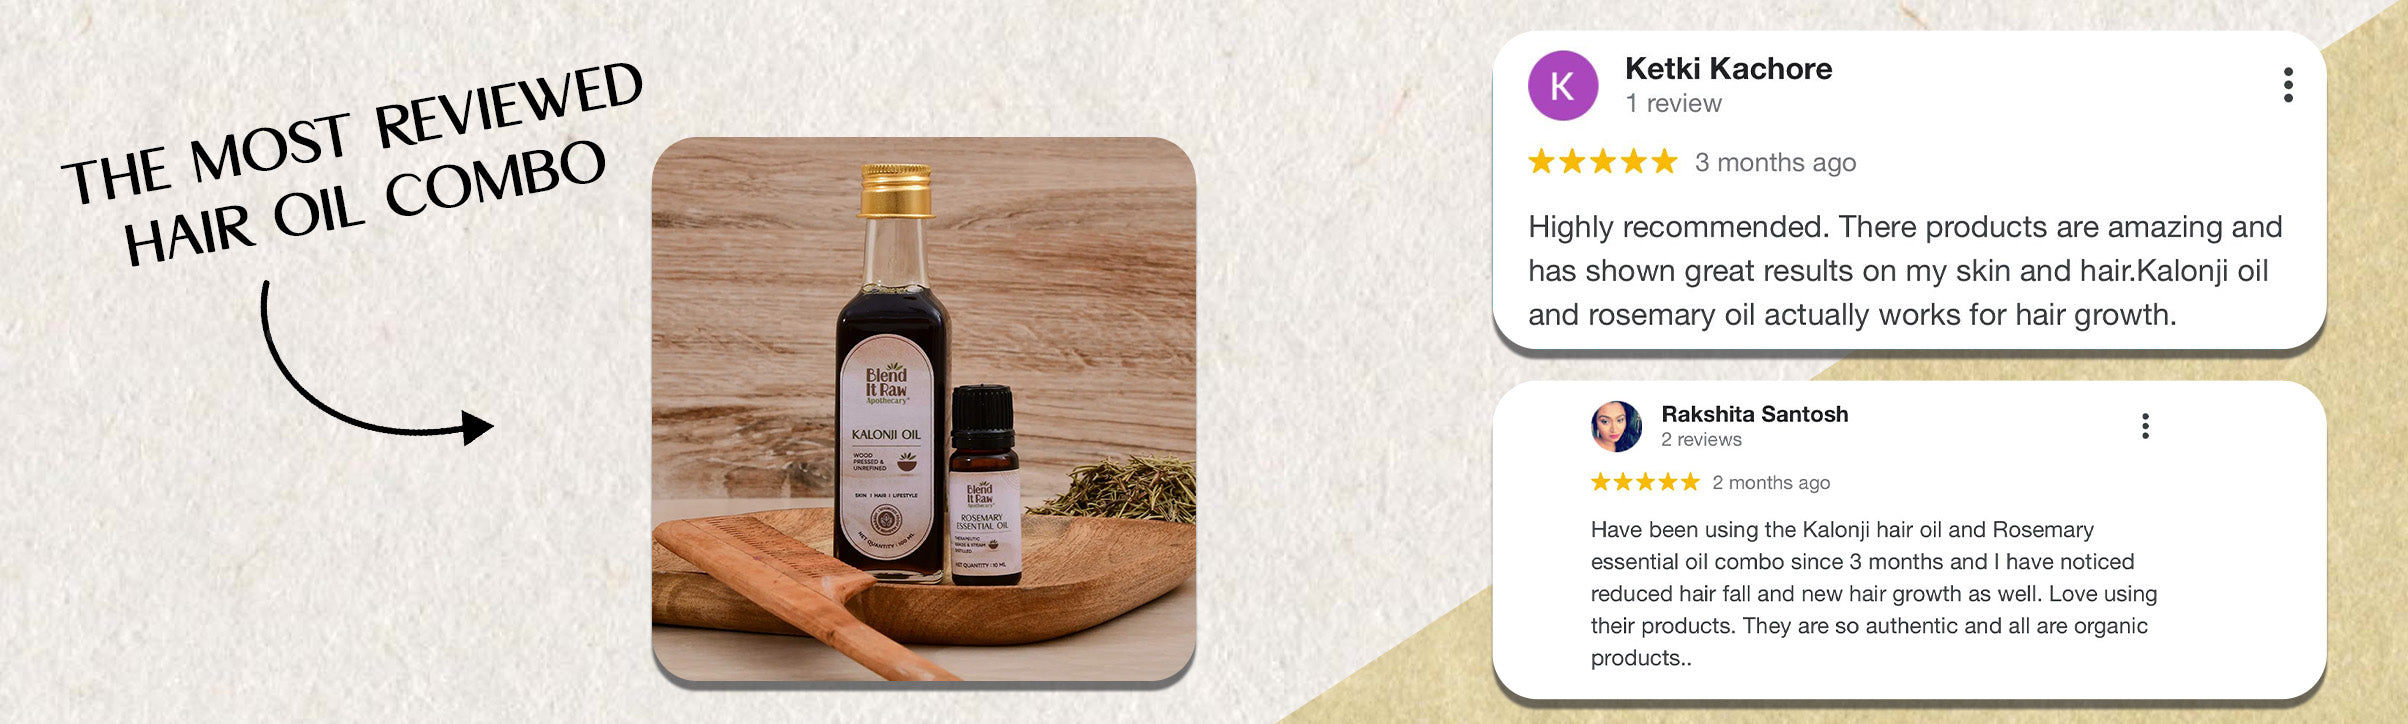 Most reviewed hair oil combo from Blend It Raw